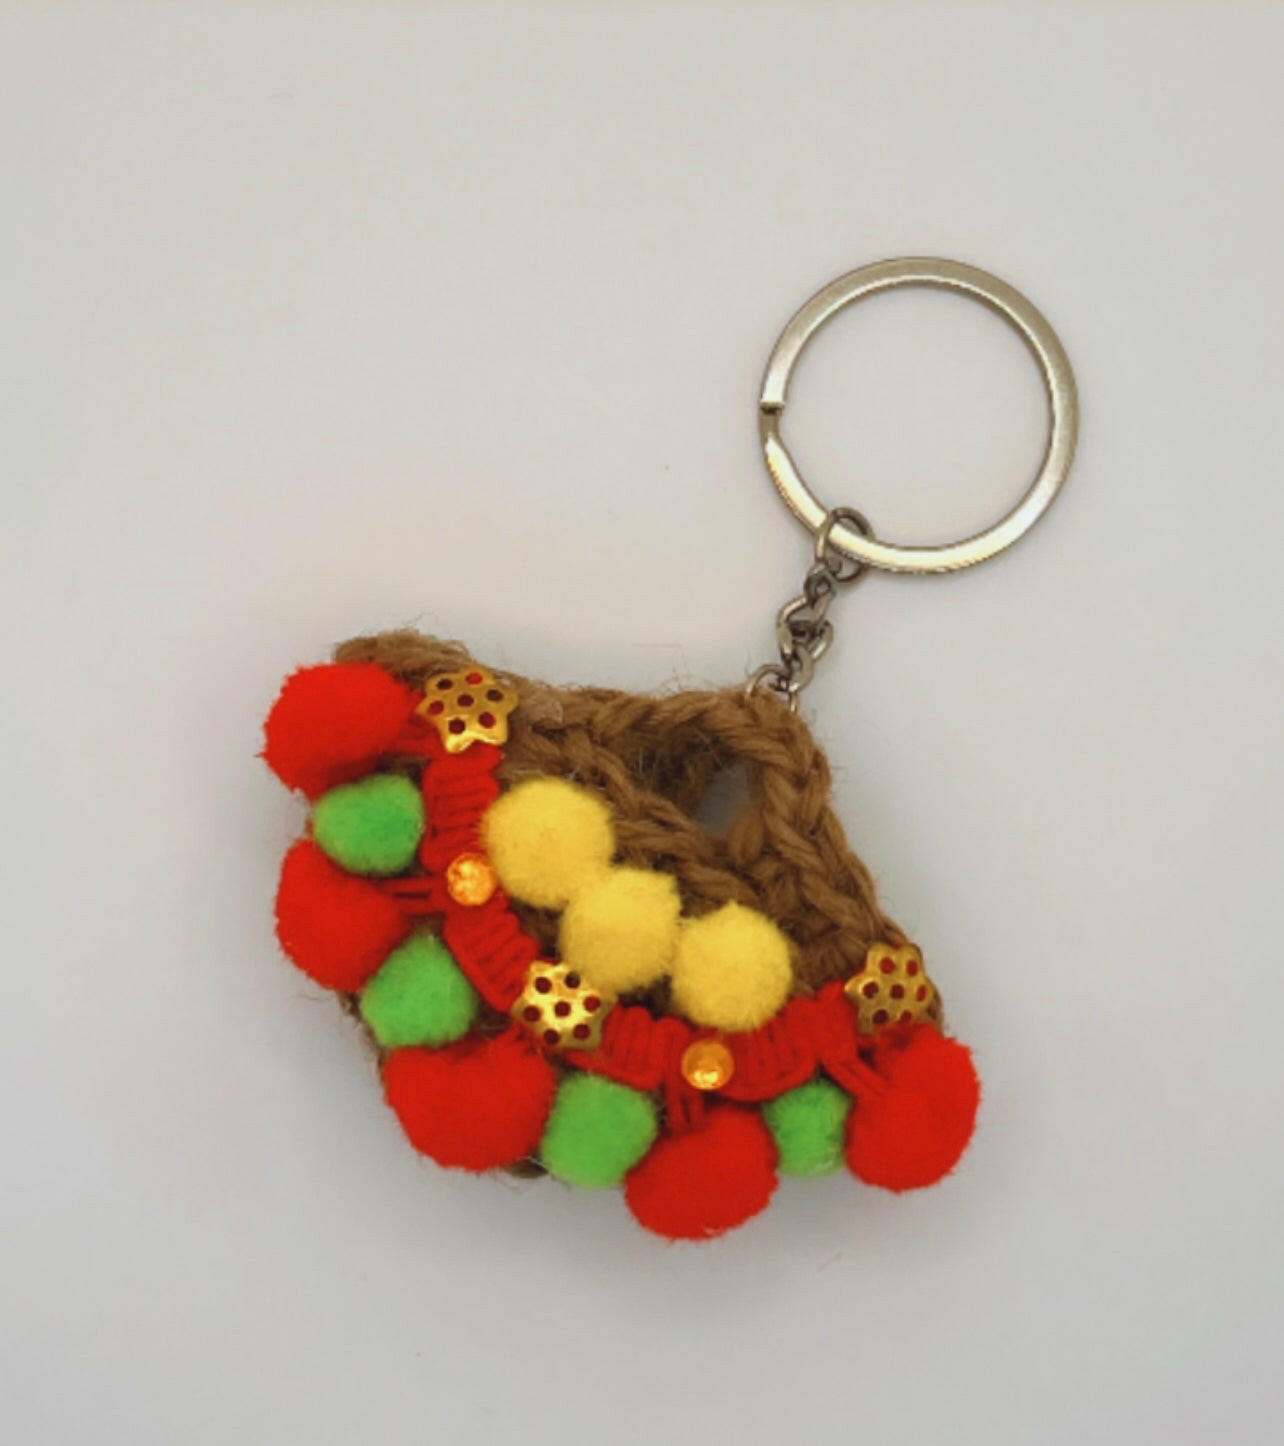 Handmade Sicilian Coffa Bag Keychain - In a Variety of Colors.